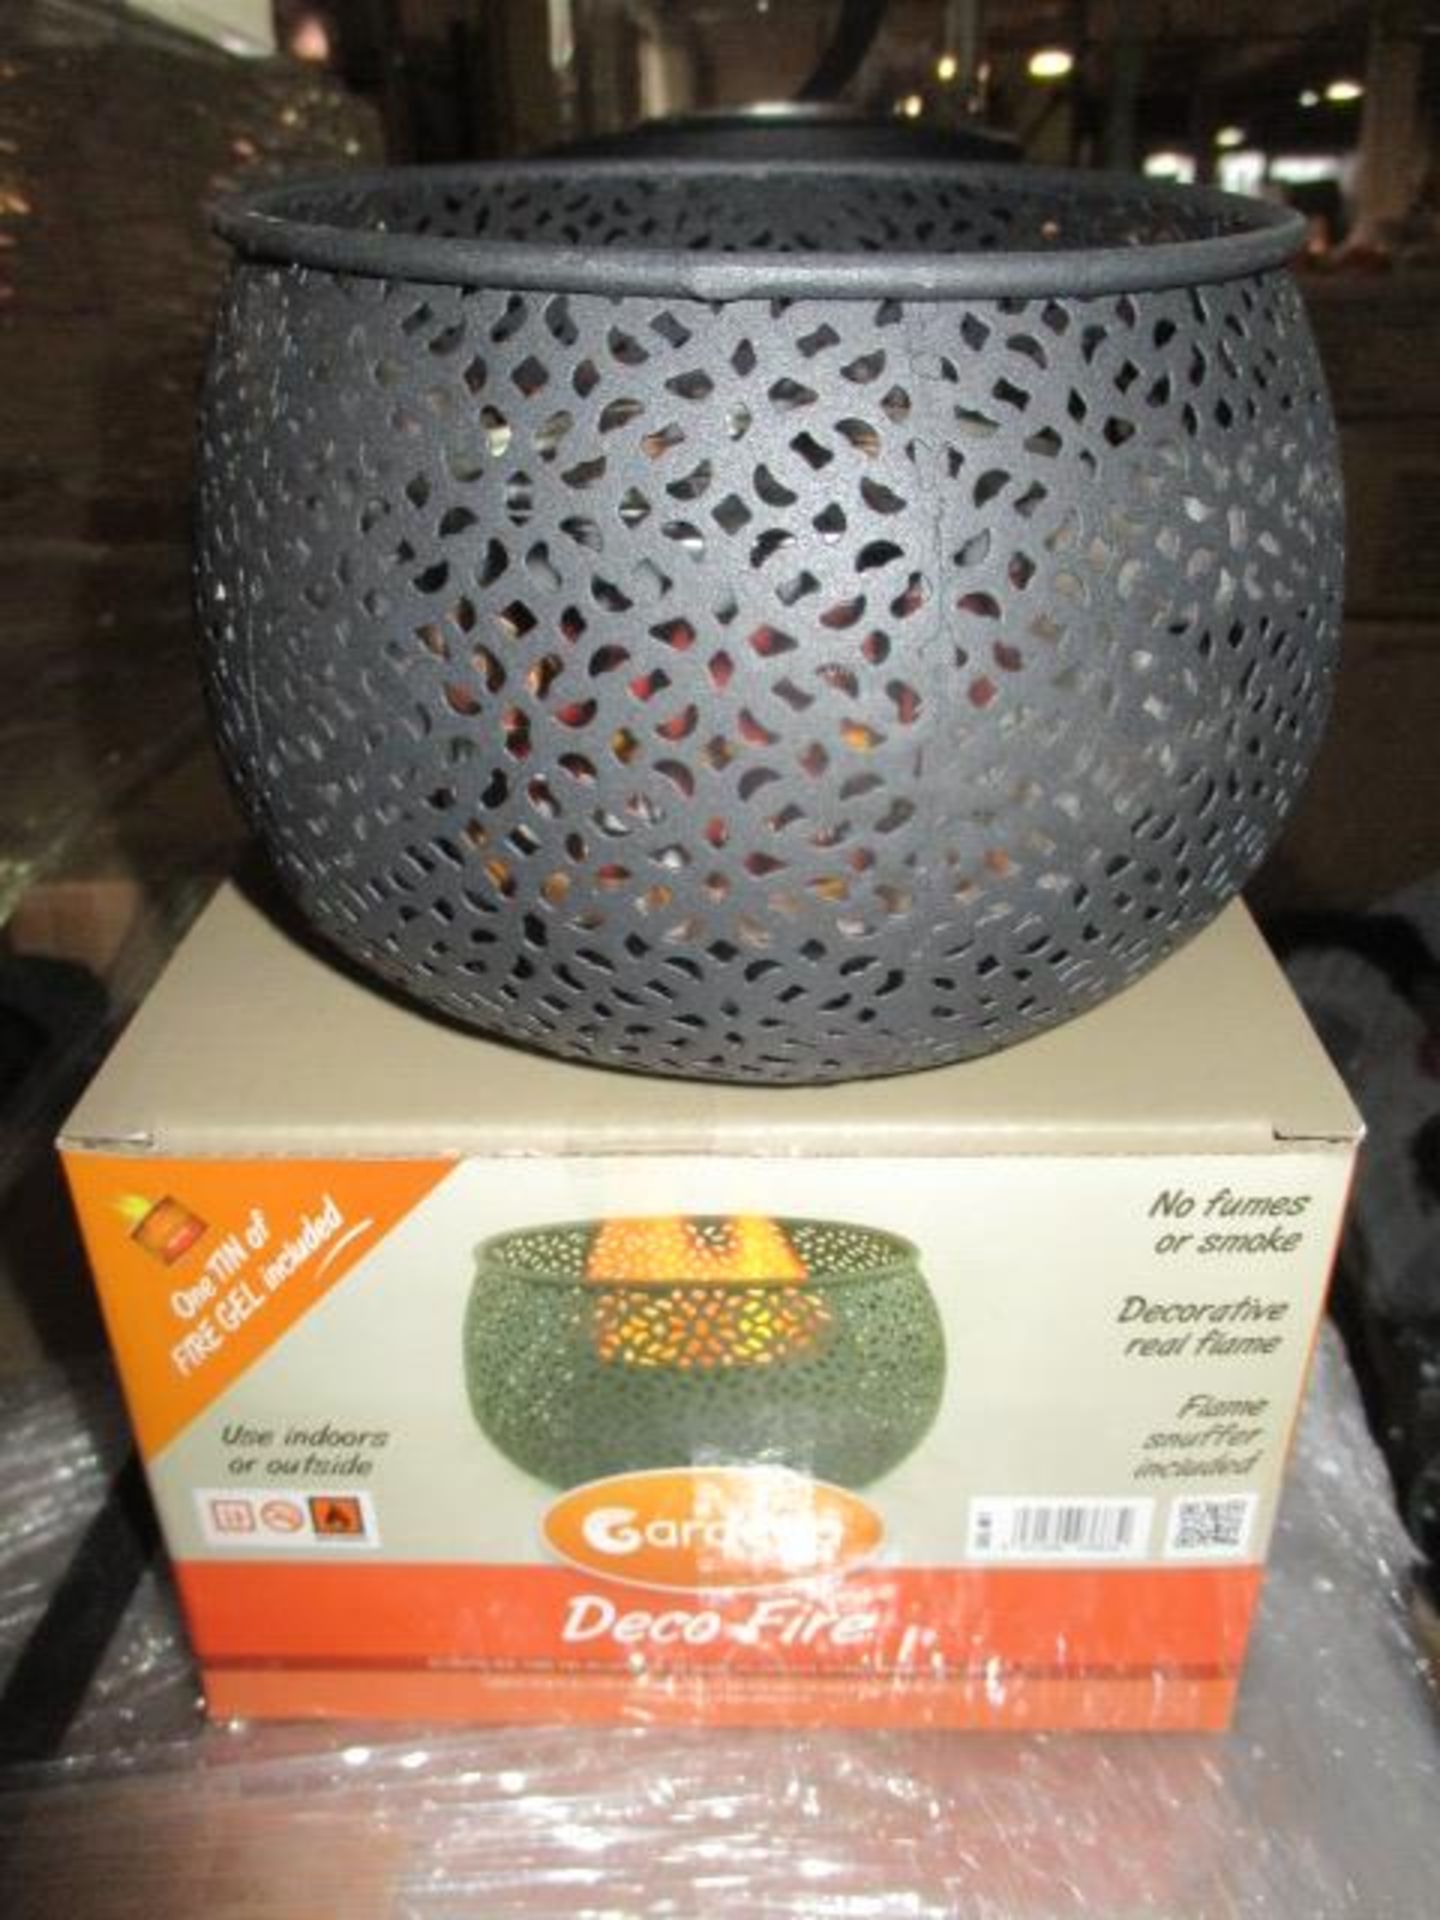 20pcs in lot brand new sealed Gardeco Lace burner with tin of fuel included